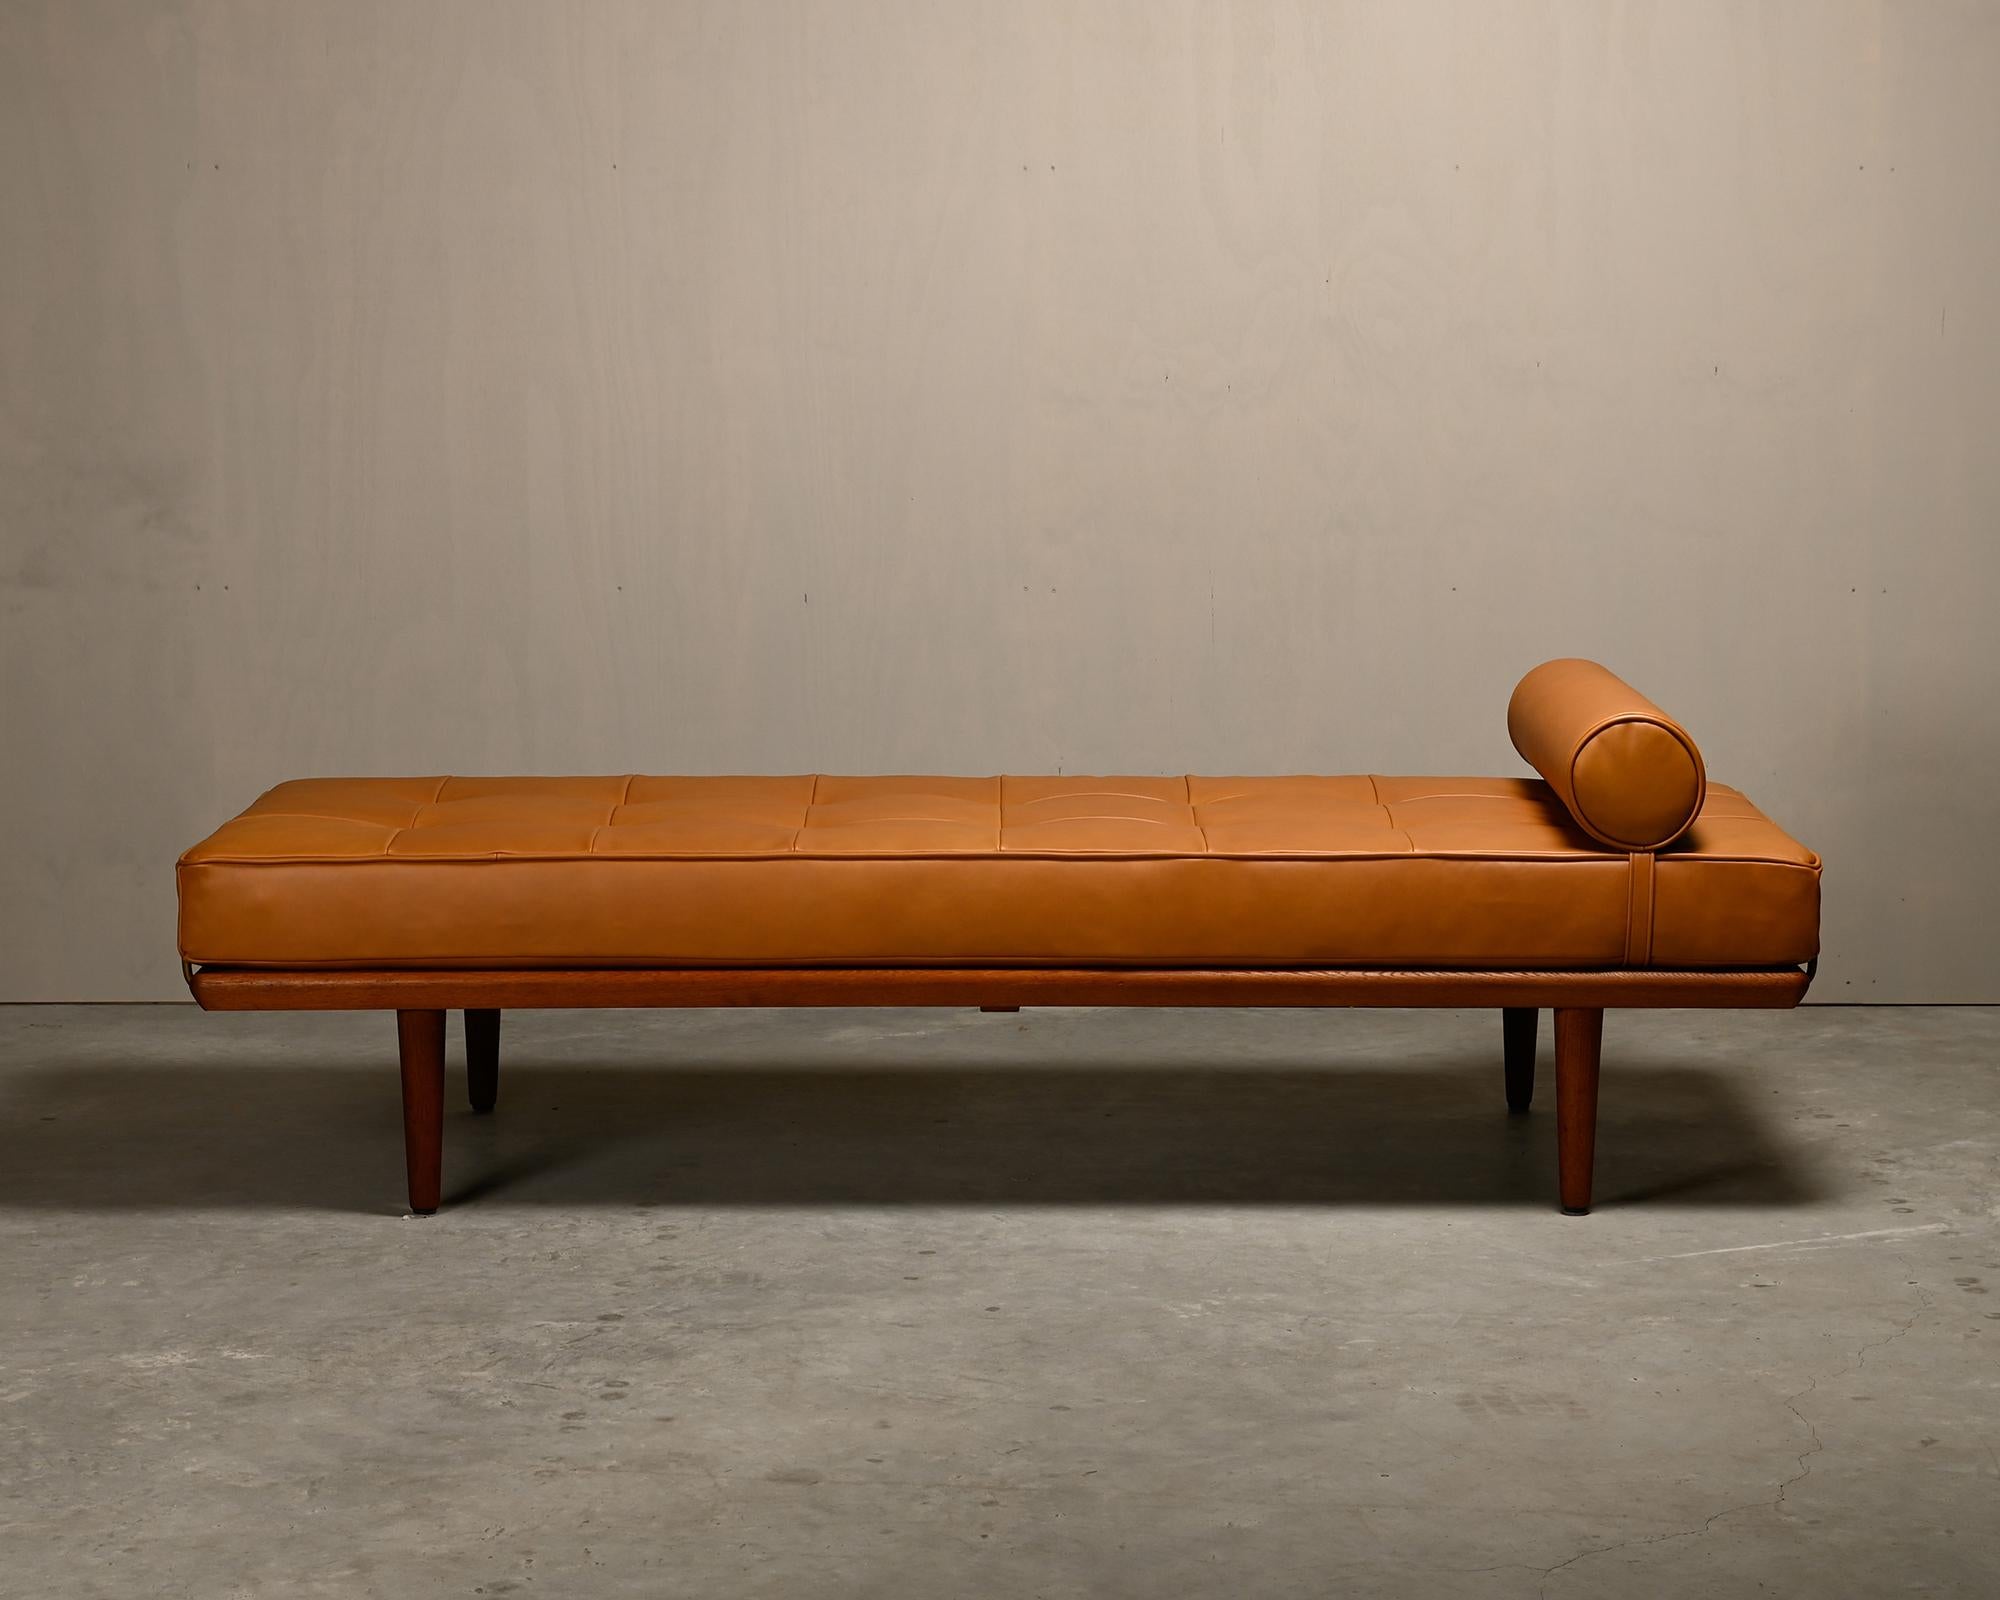 Mid-20th Century Hans J. Wegner GE19 Daybed with Teak and Camel Leather for Getama Denmark 1960s For Sale